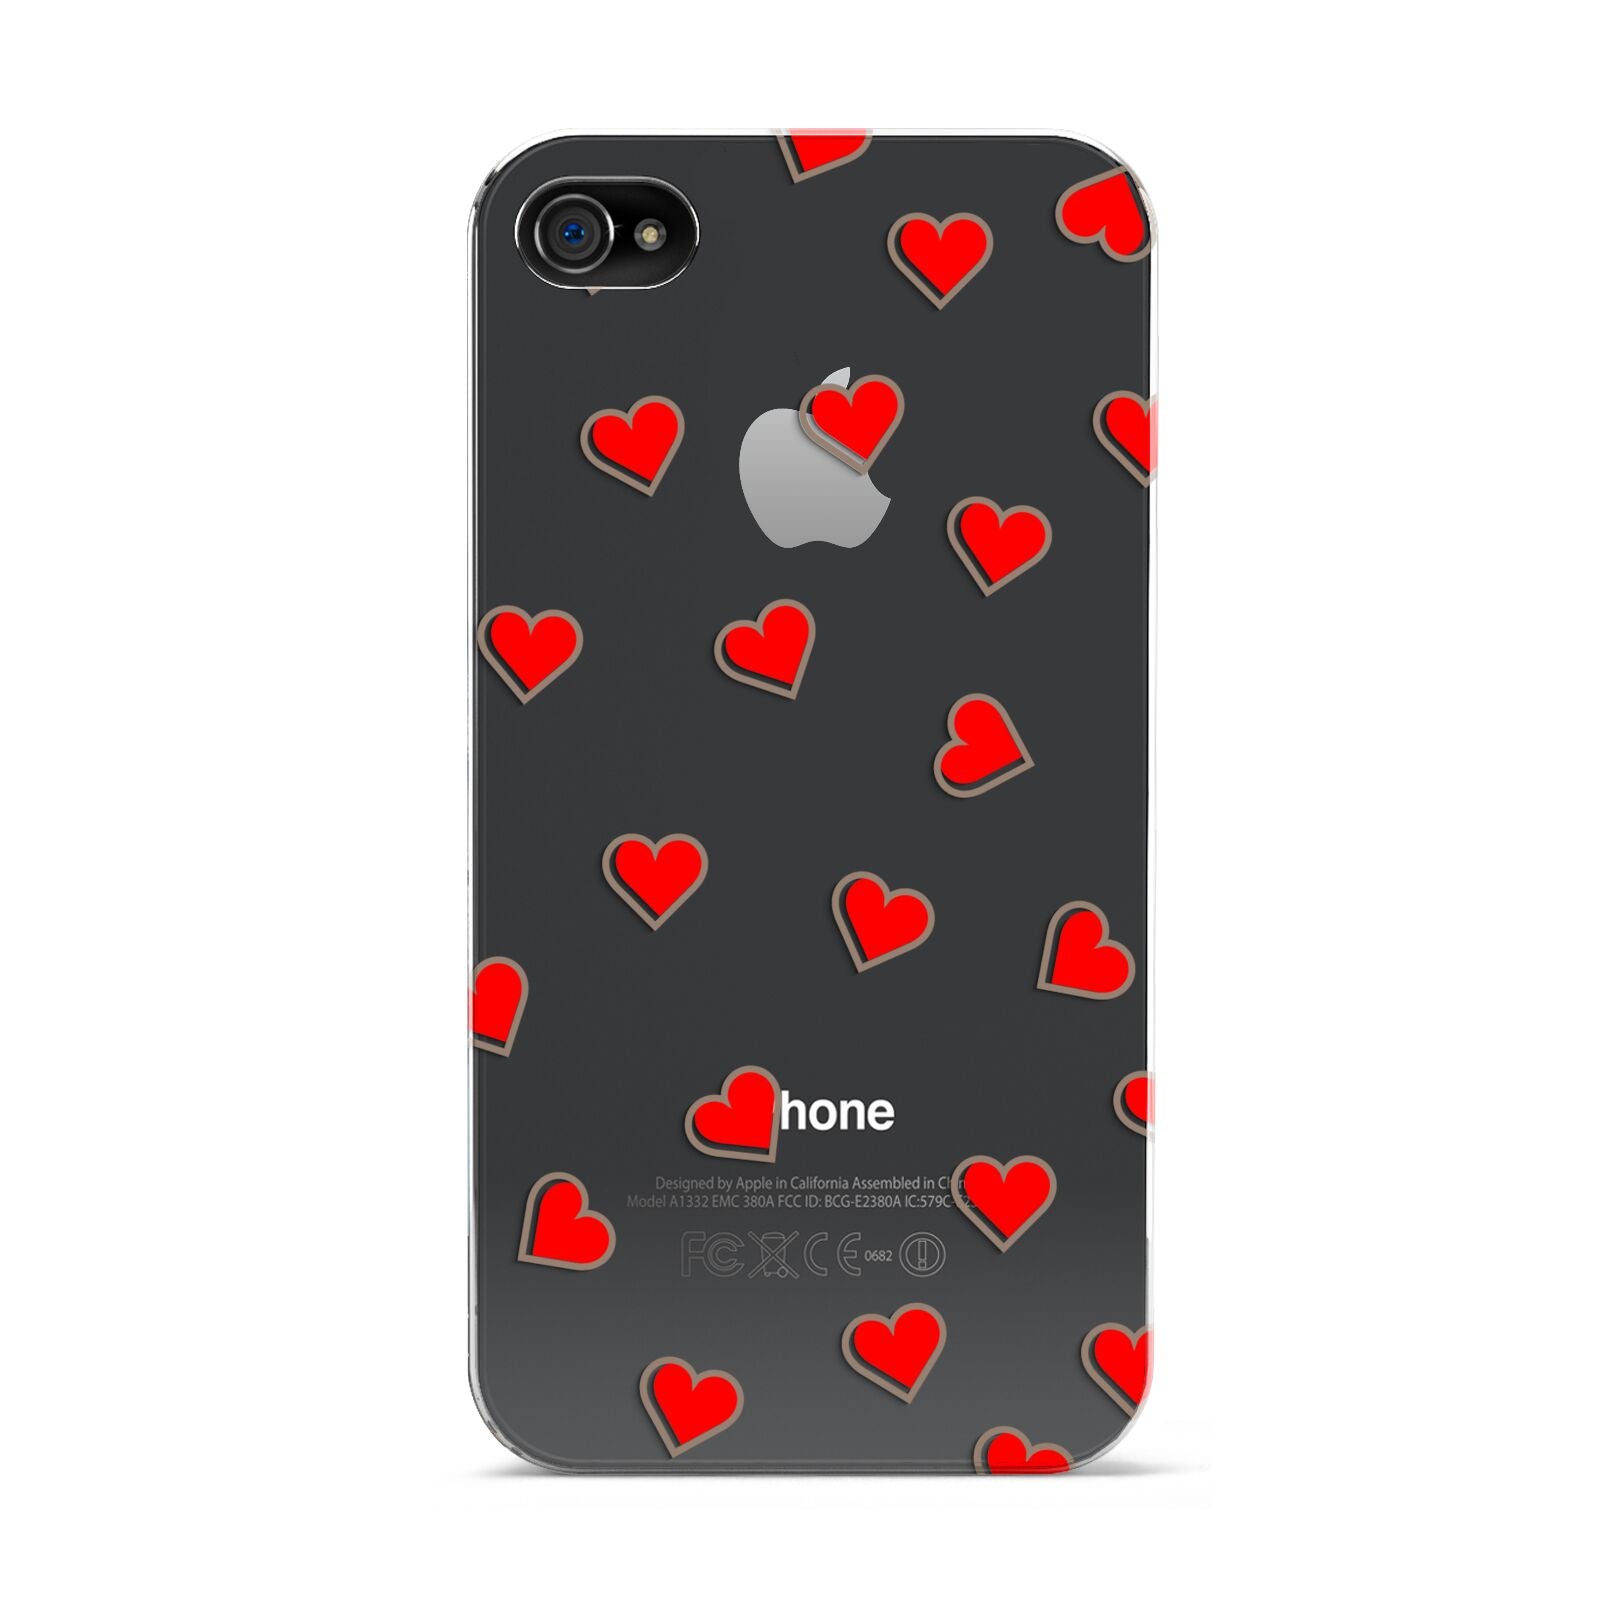 Cute Red Hearts Apple iPhone 4s Case